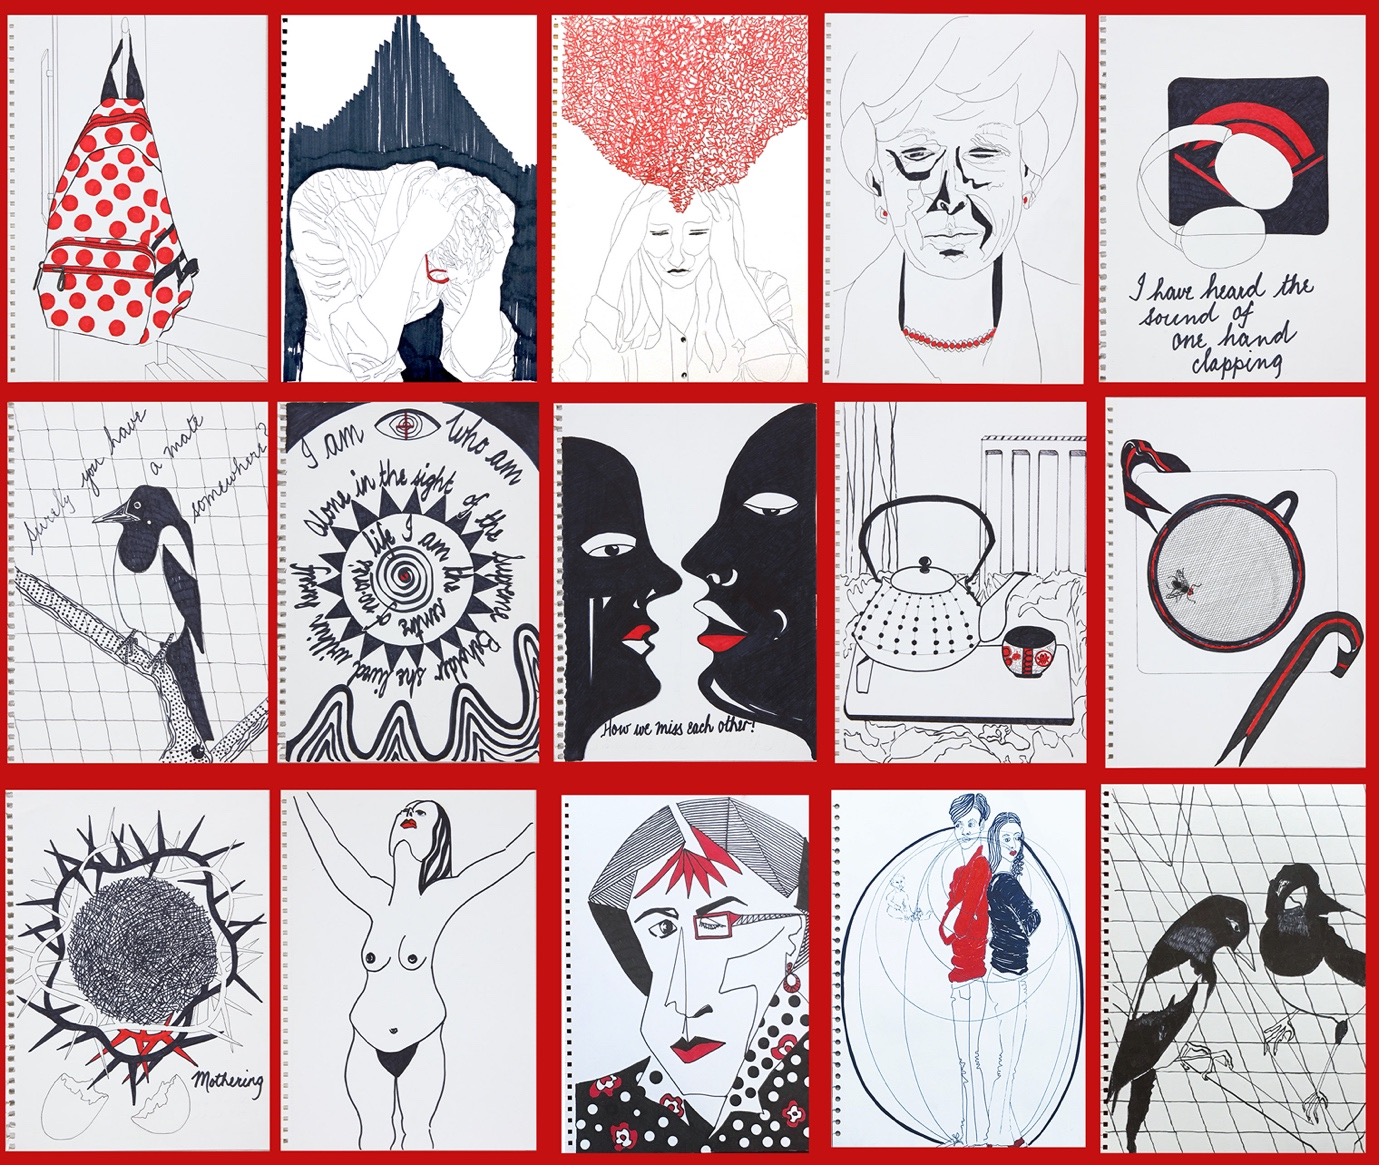 A series of 15 paintings all using red, white and black